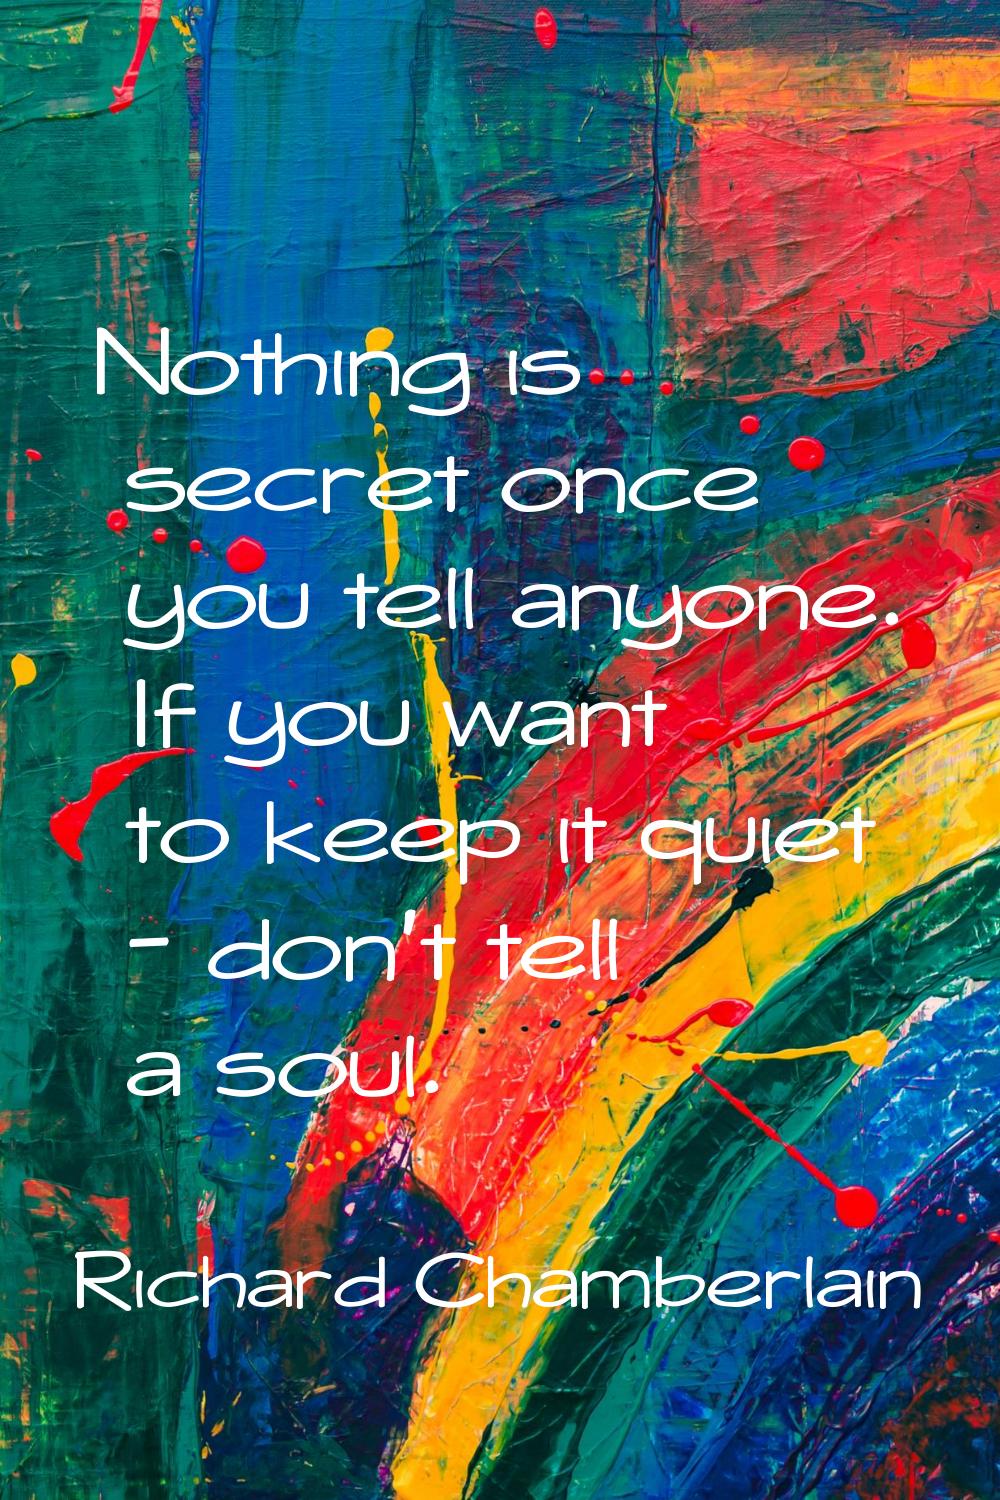 Nothing is secret once you tell anyone. If you want to keep it quiet - don't tell a soul.